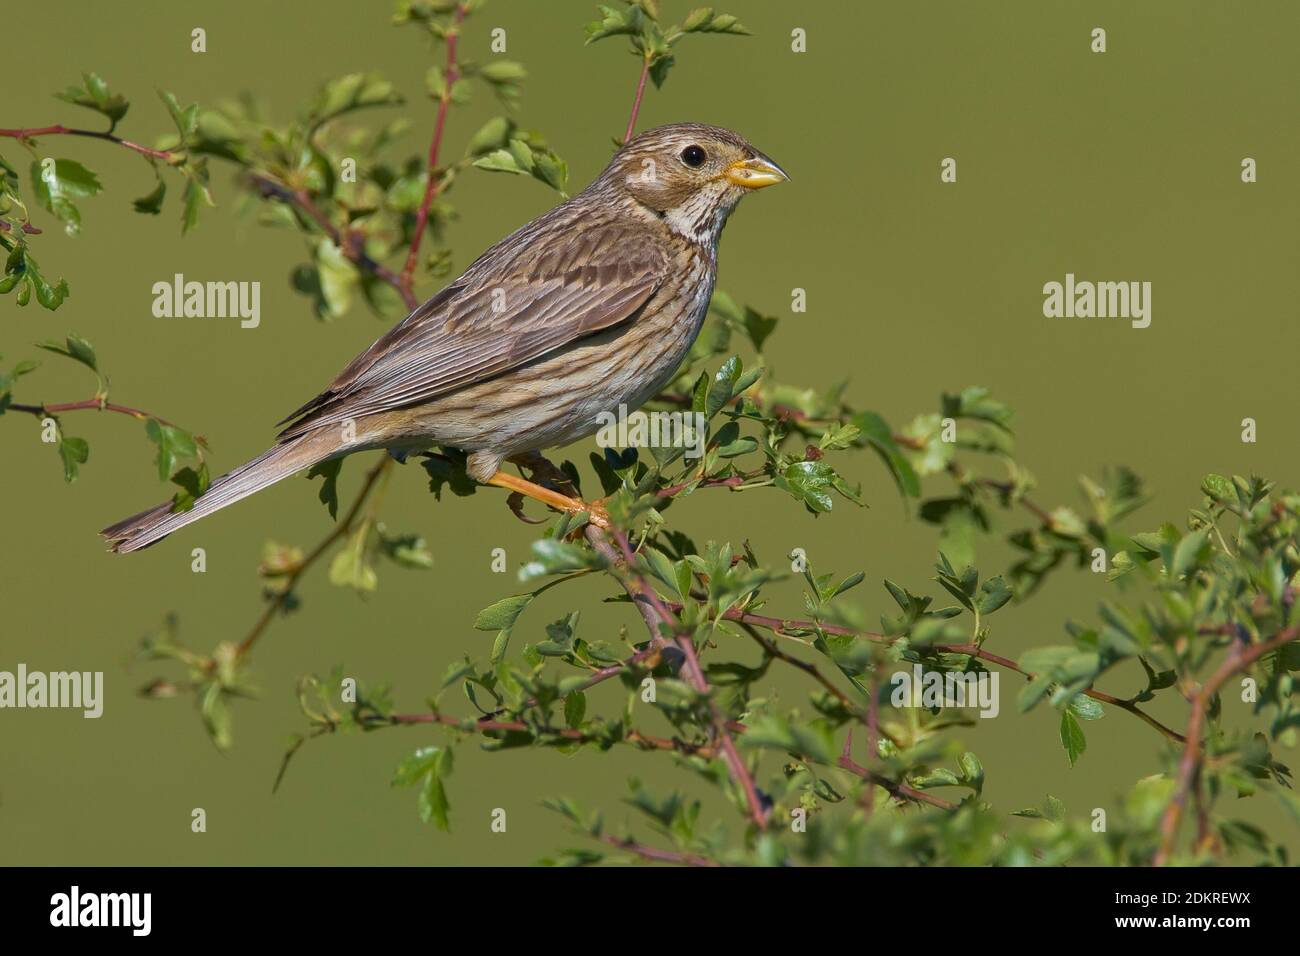 Grauwe Gors in struik; Corn Bunting on a branch Stock Photo